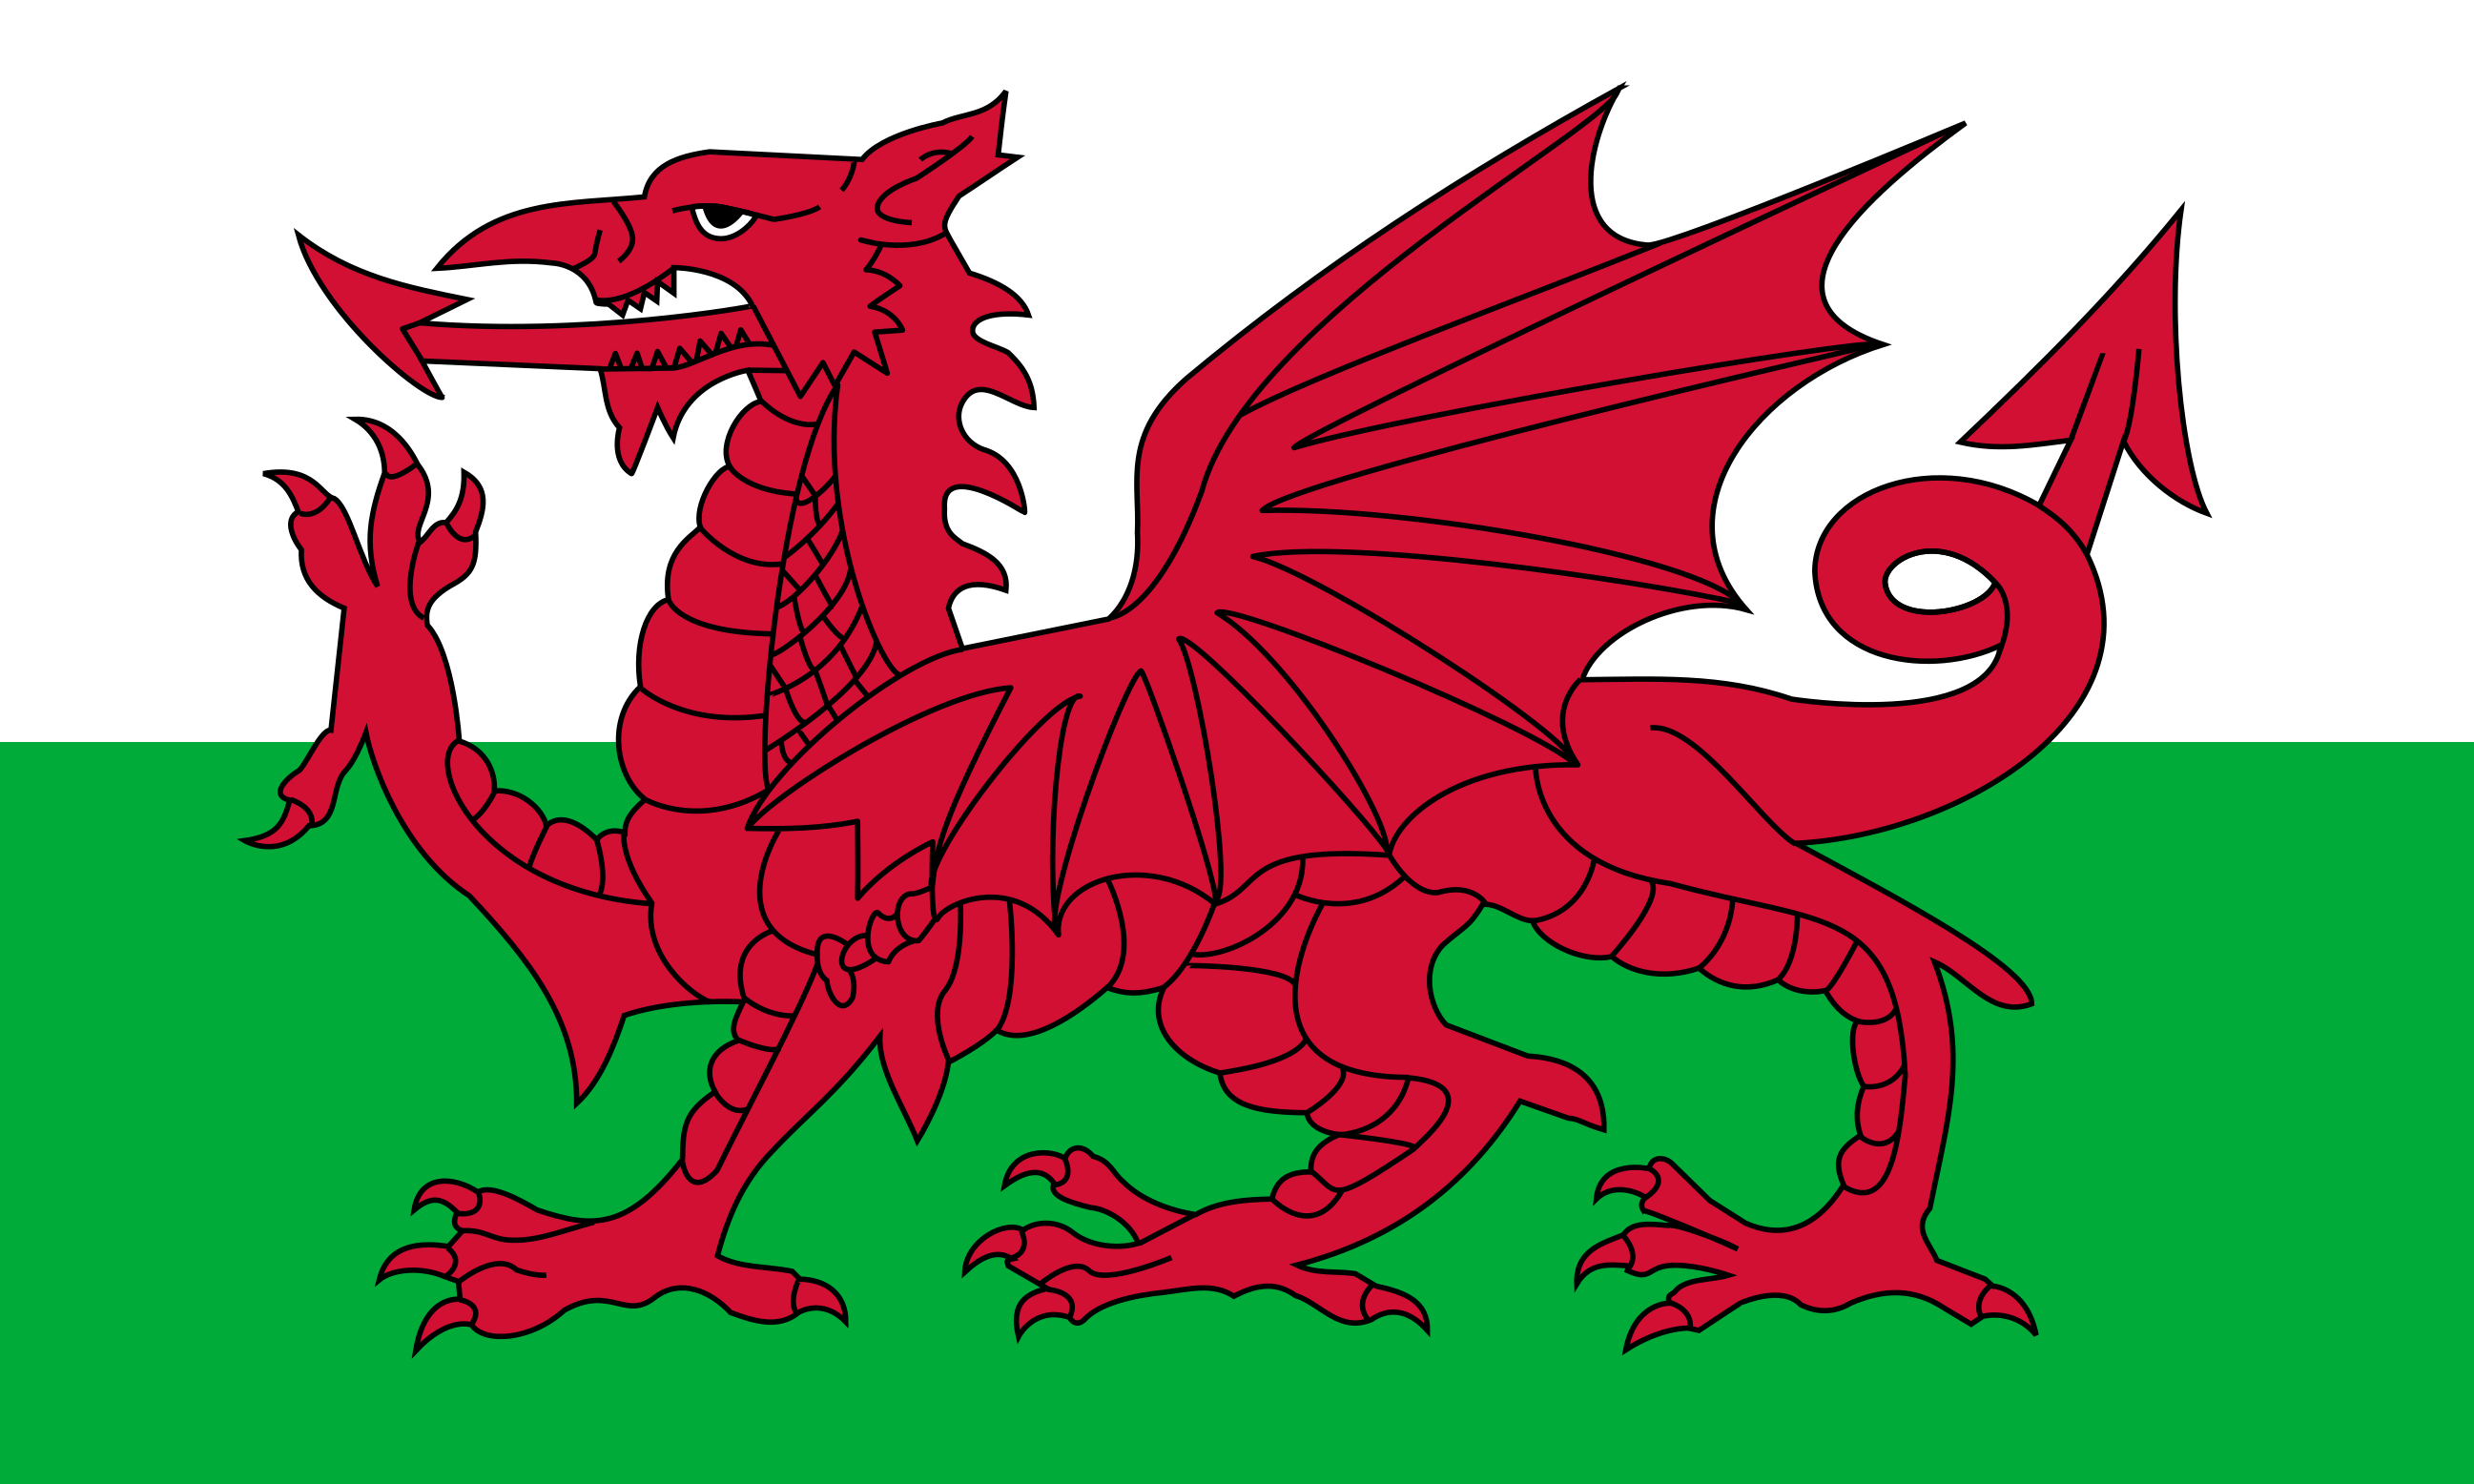 Flag of Wales  1959: JPG PD PNG EPS SVG GIF and more